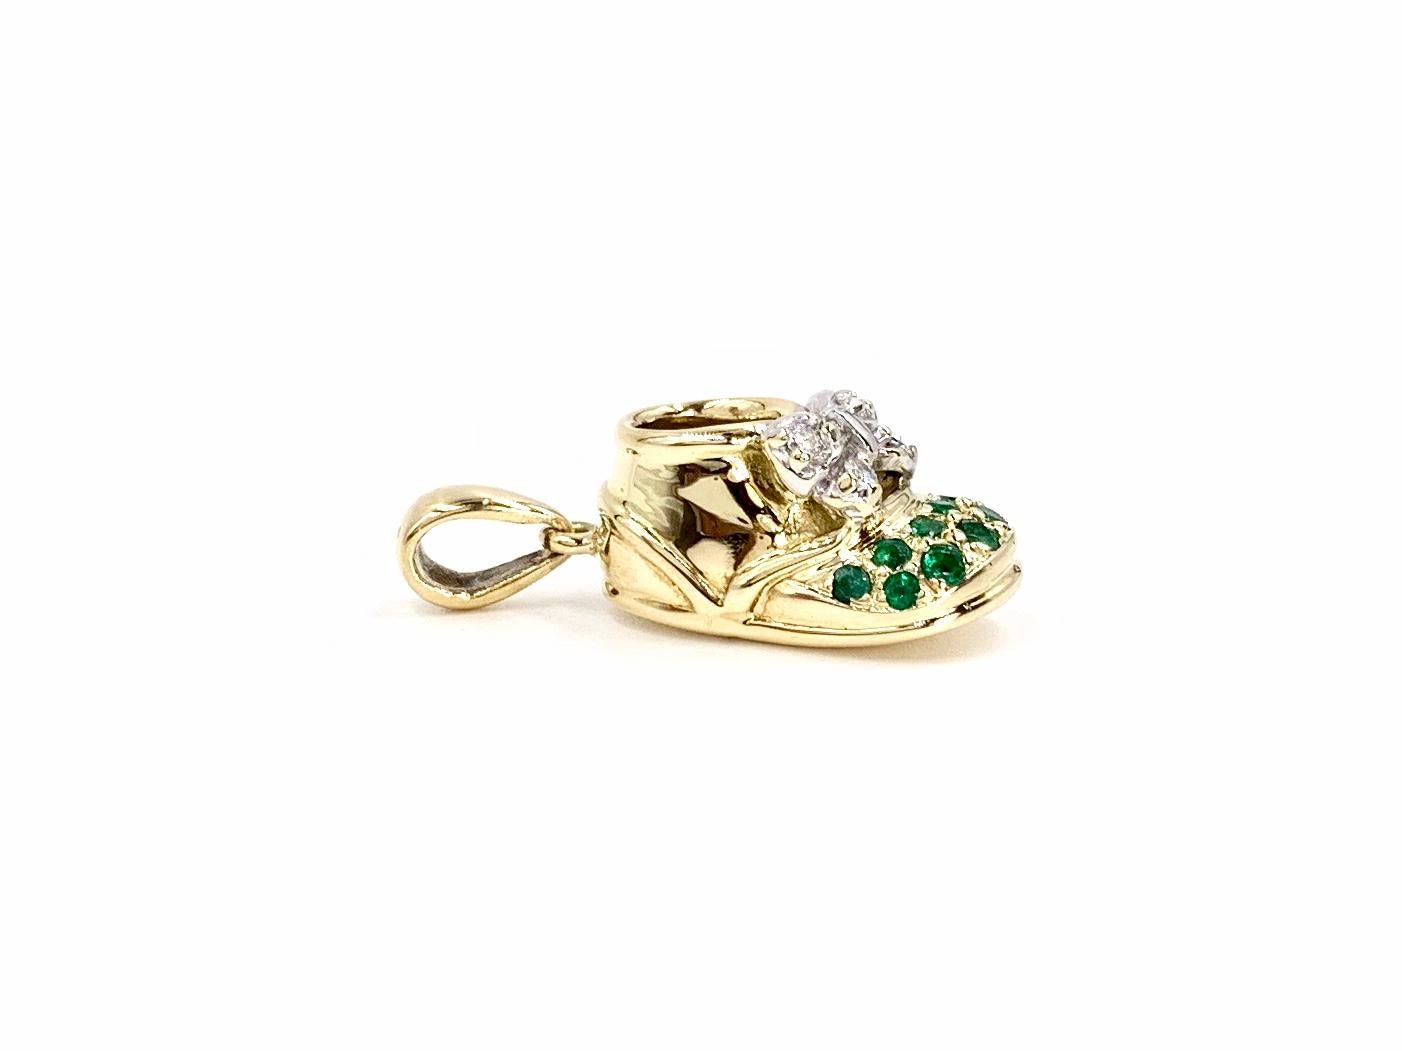 Authentic Felix B. Vollman & Co. solid 18 karat yellow gold baby shoe pendant/charm adorned with emeralds on the toe and diamonds on the white gold bow. Emeralds have an approximate total weight of .40 carats with excellent saturation. Diamond